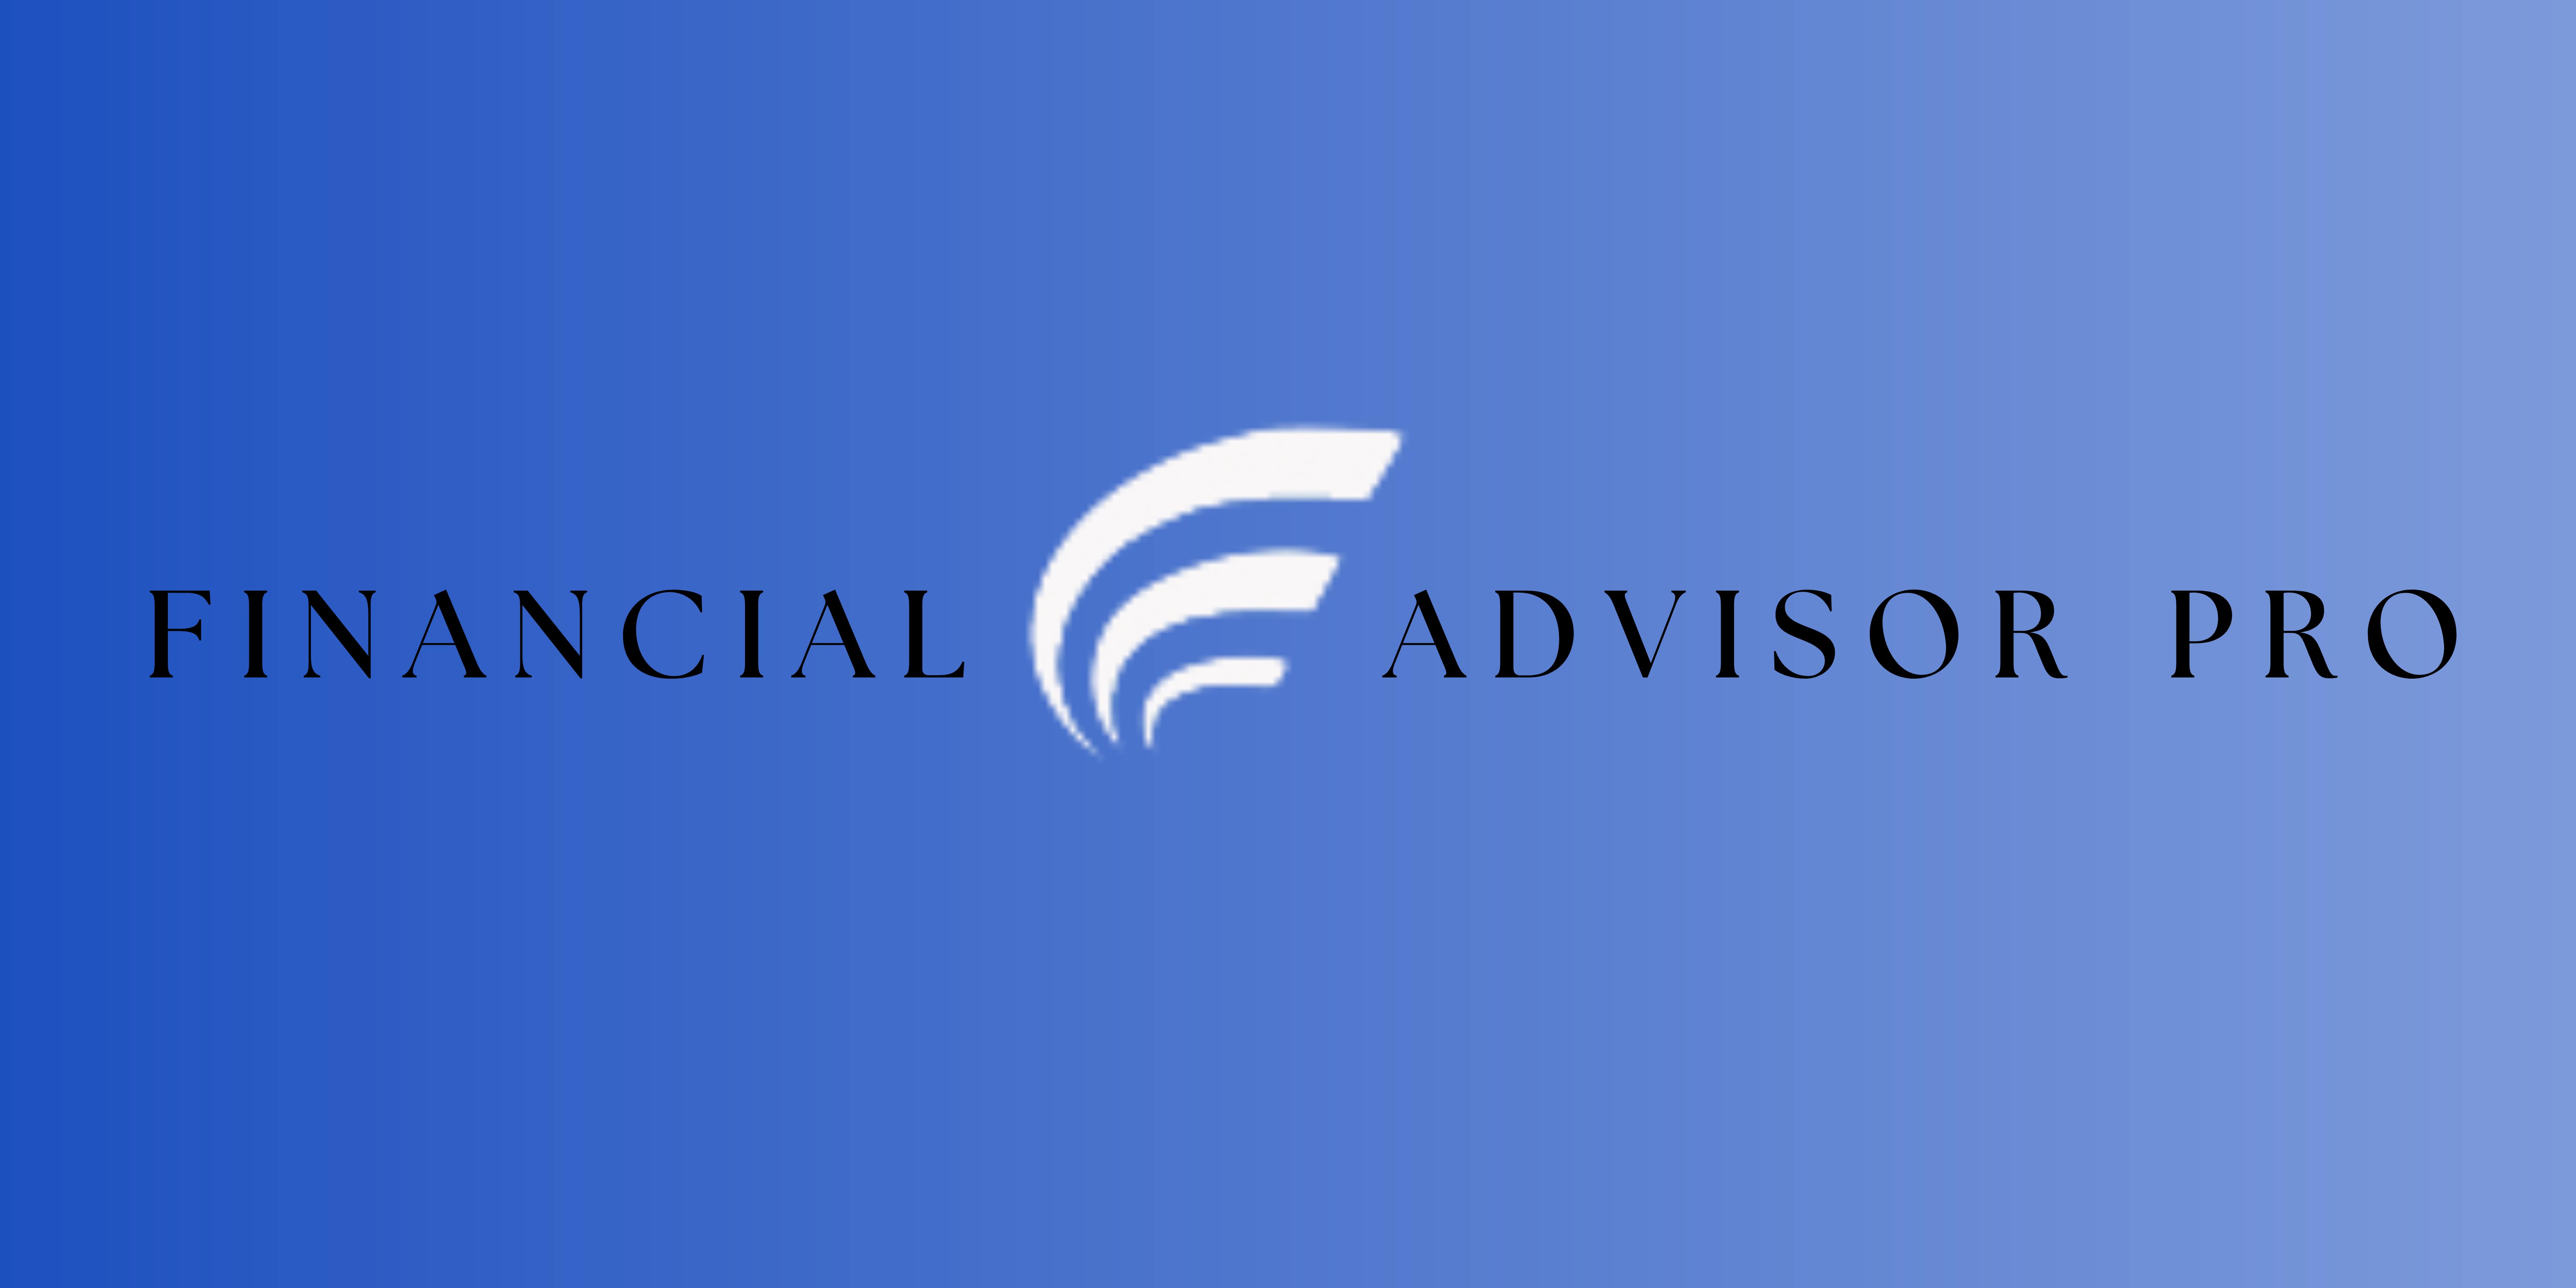 How to become a financial advisor with Financial Advisor Pro.